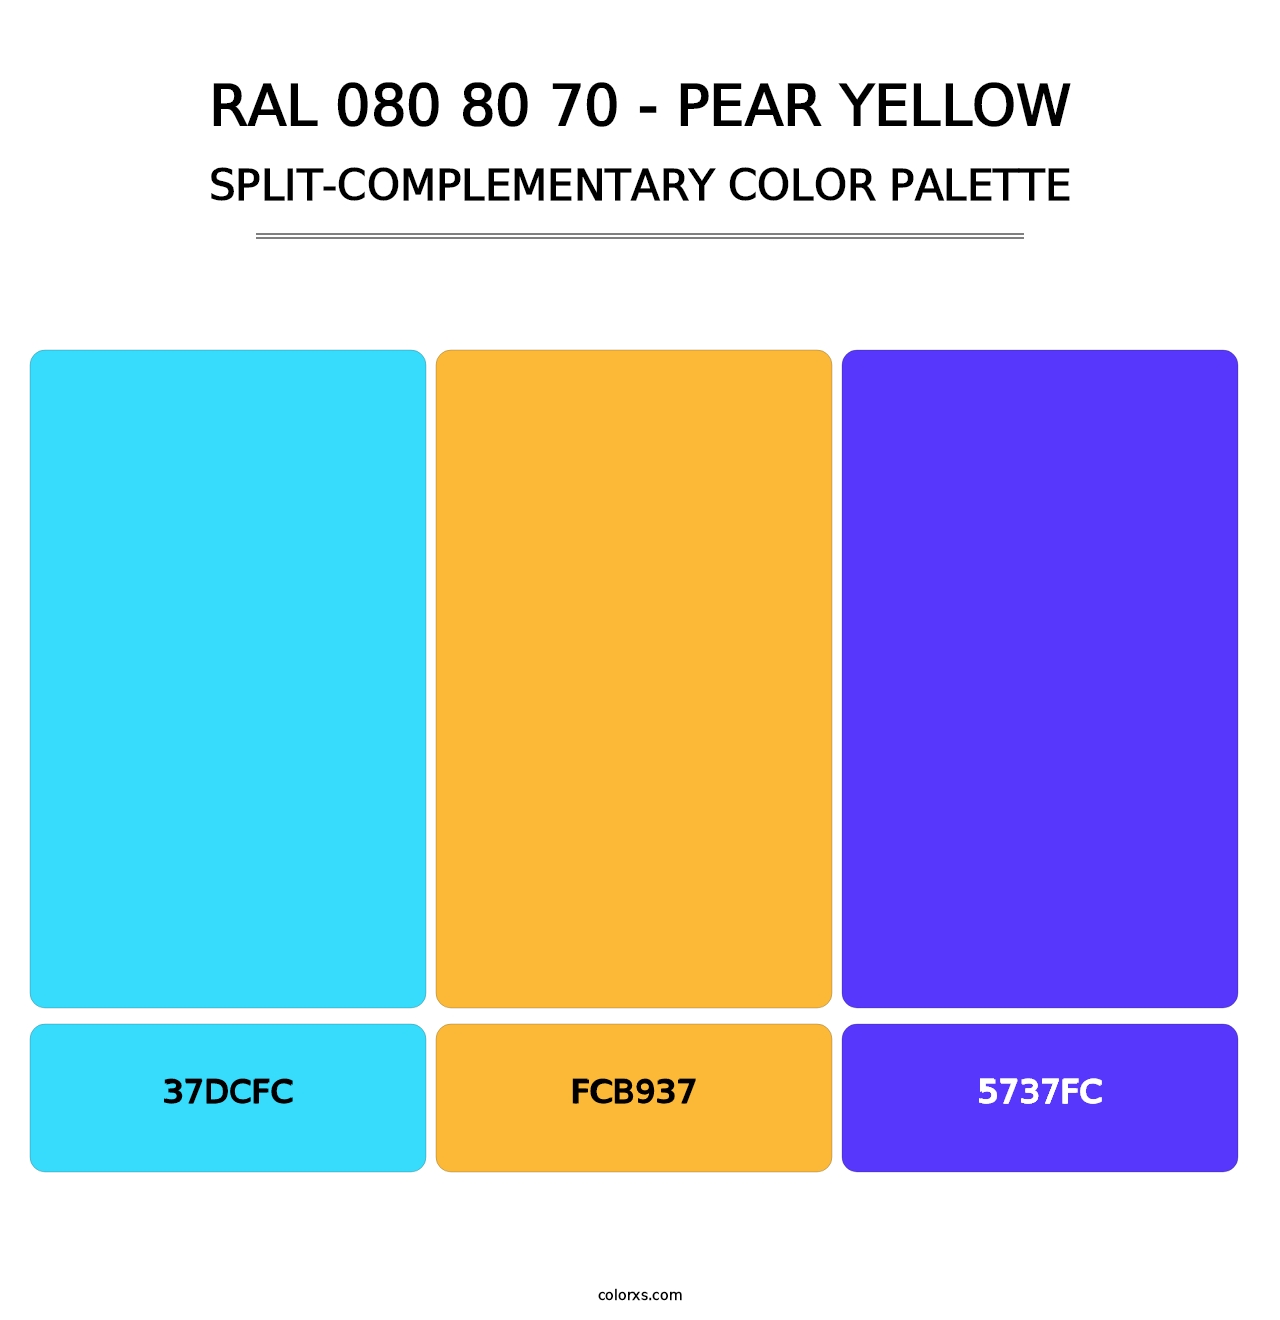 RAL 080 80 70 - Pear Yellow - Split-Complementary Color Palette